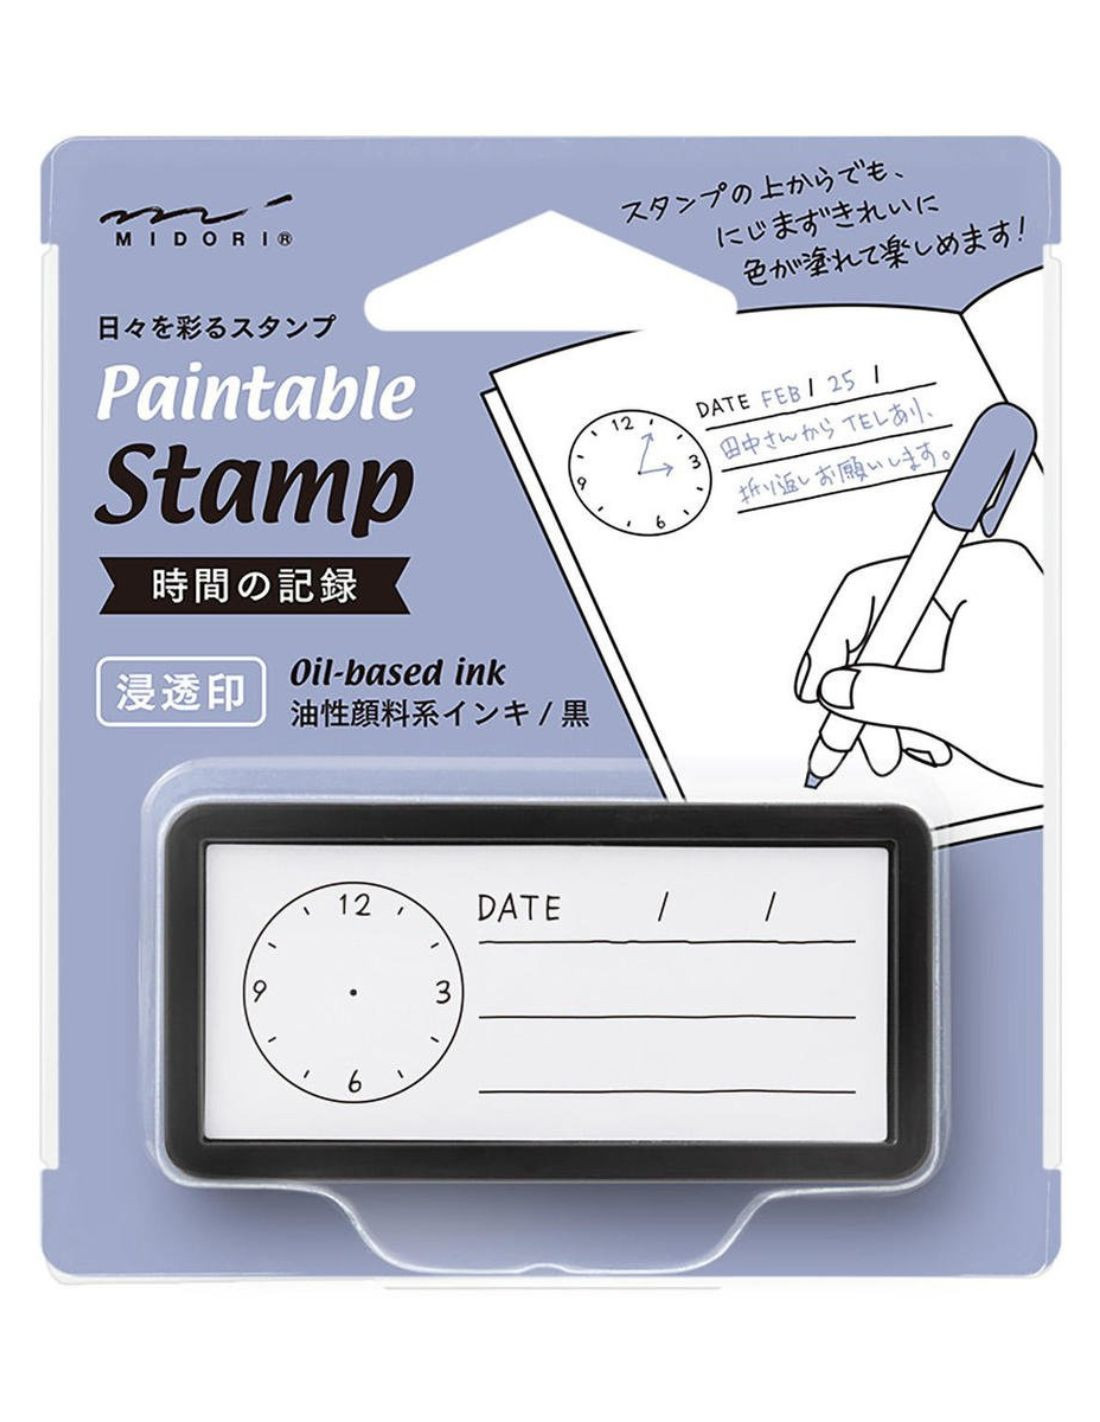 Pre-inked Paintable Stamp - Keep Track of Time - Midori